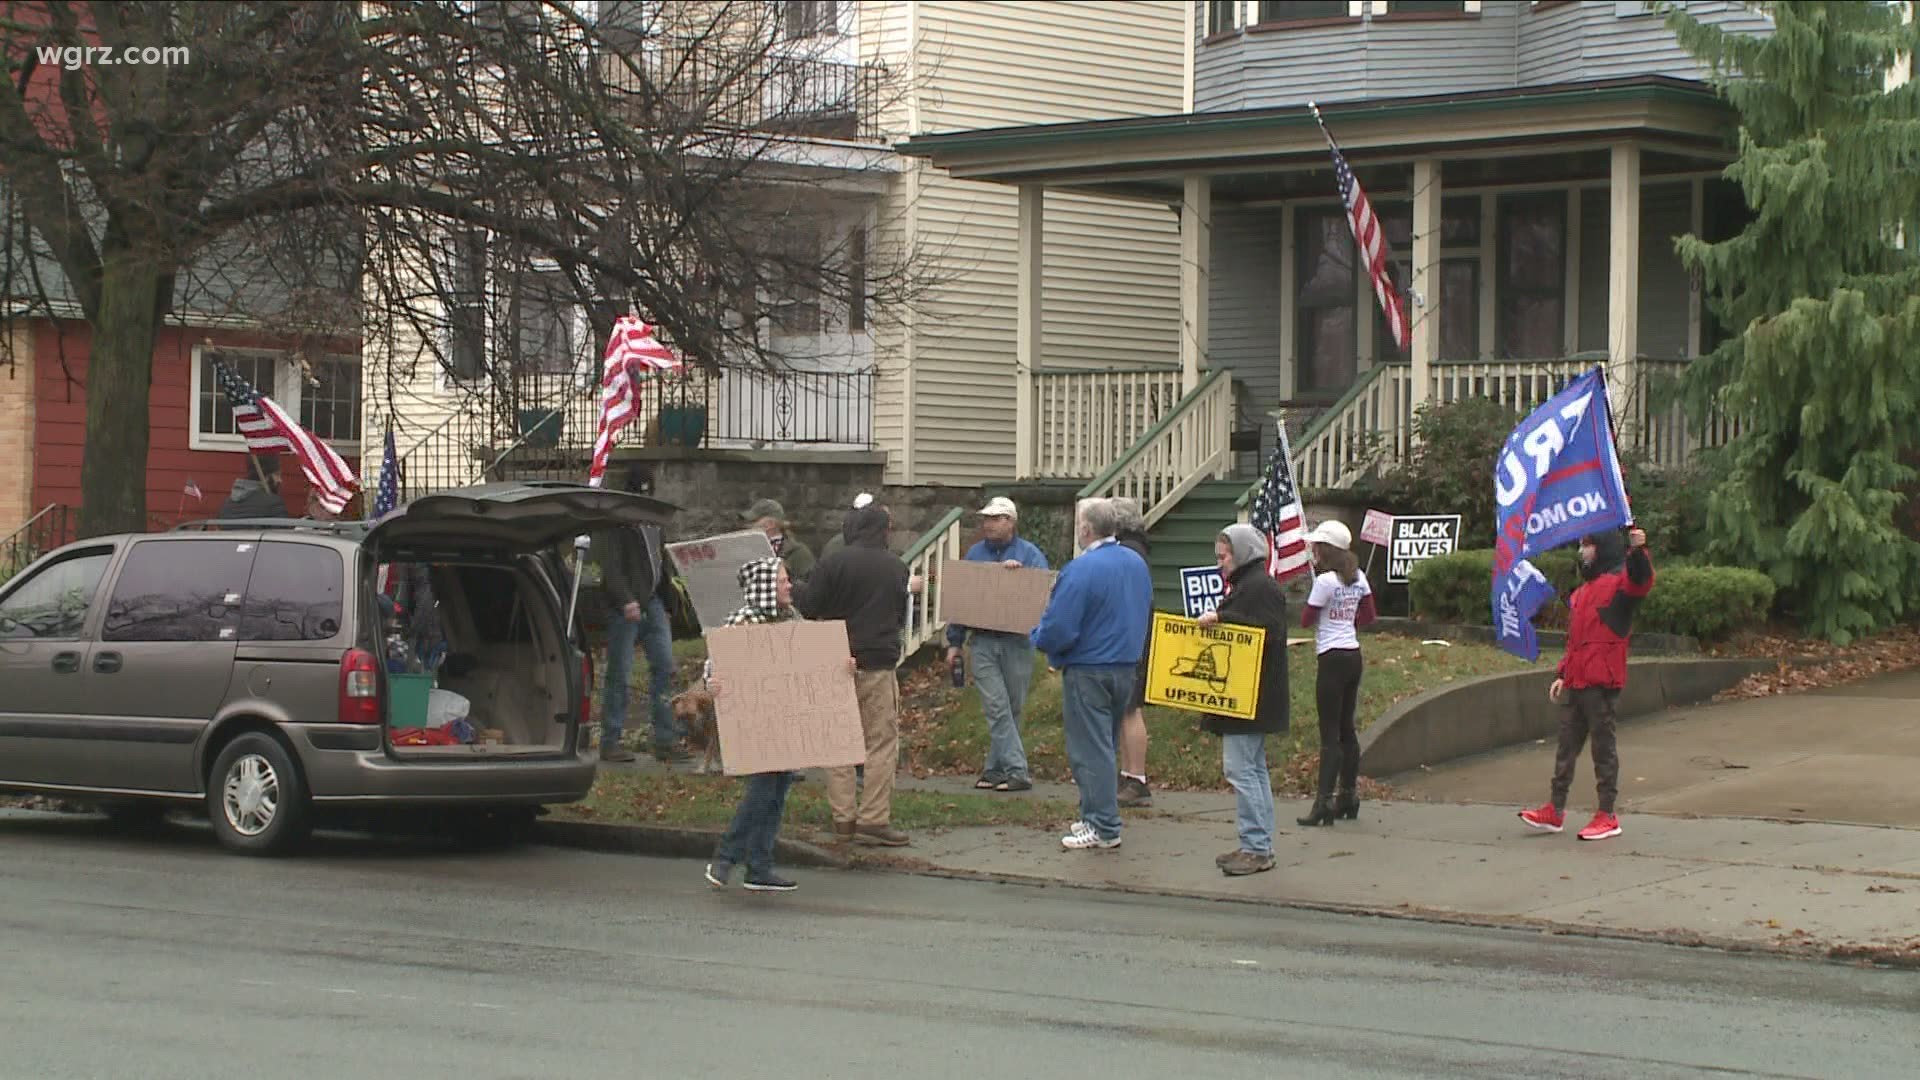 Another protest in front of County Executive's home